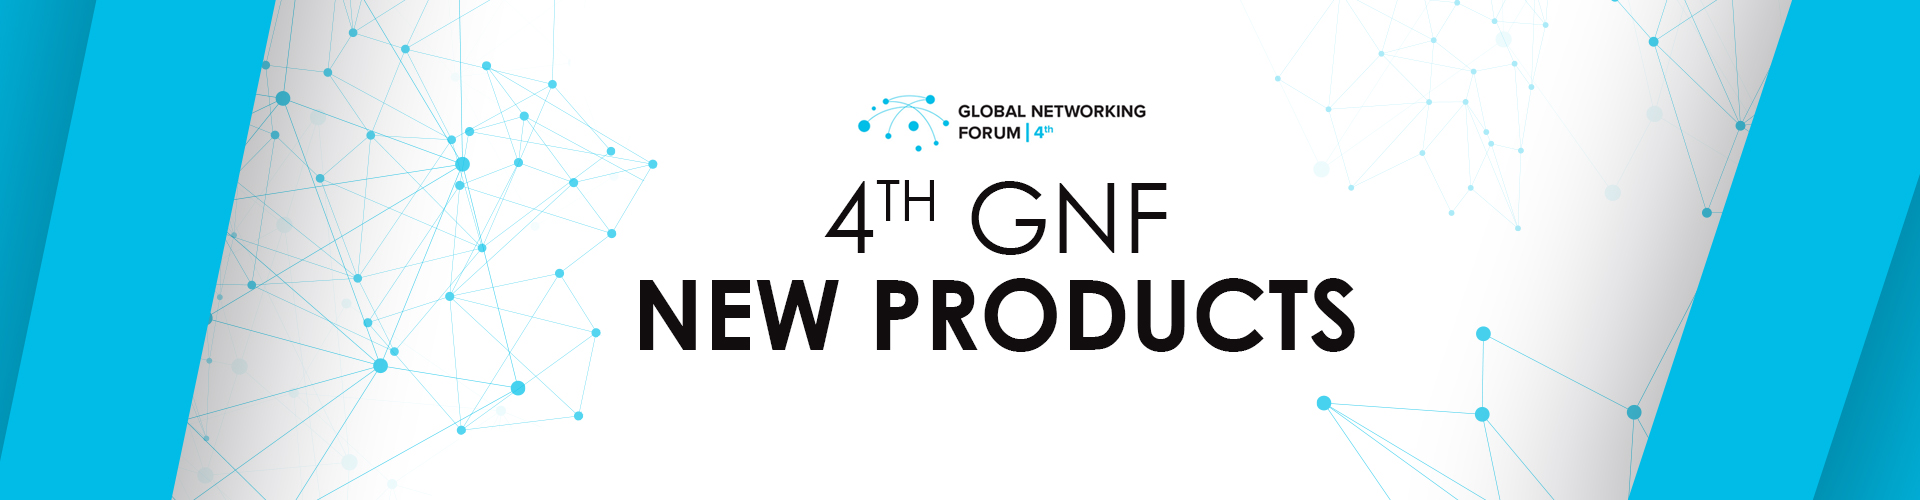 Discover new products of 4th GNF!